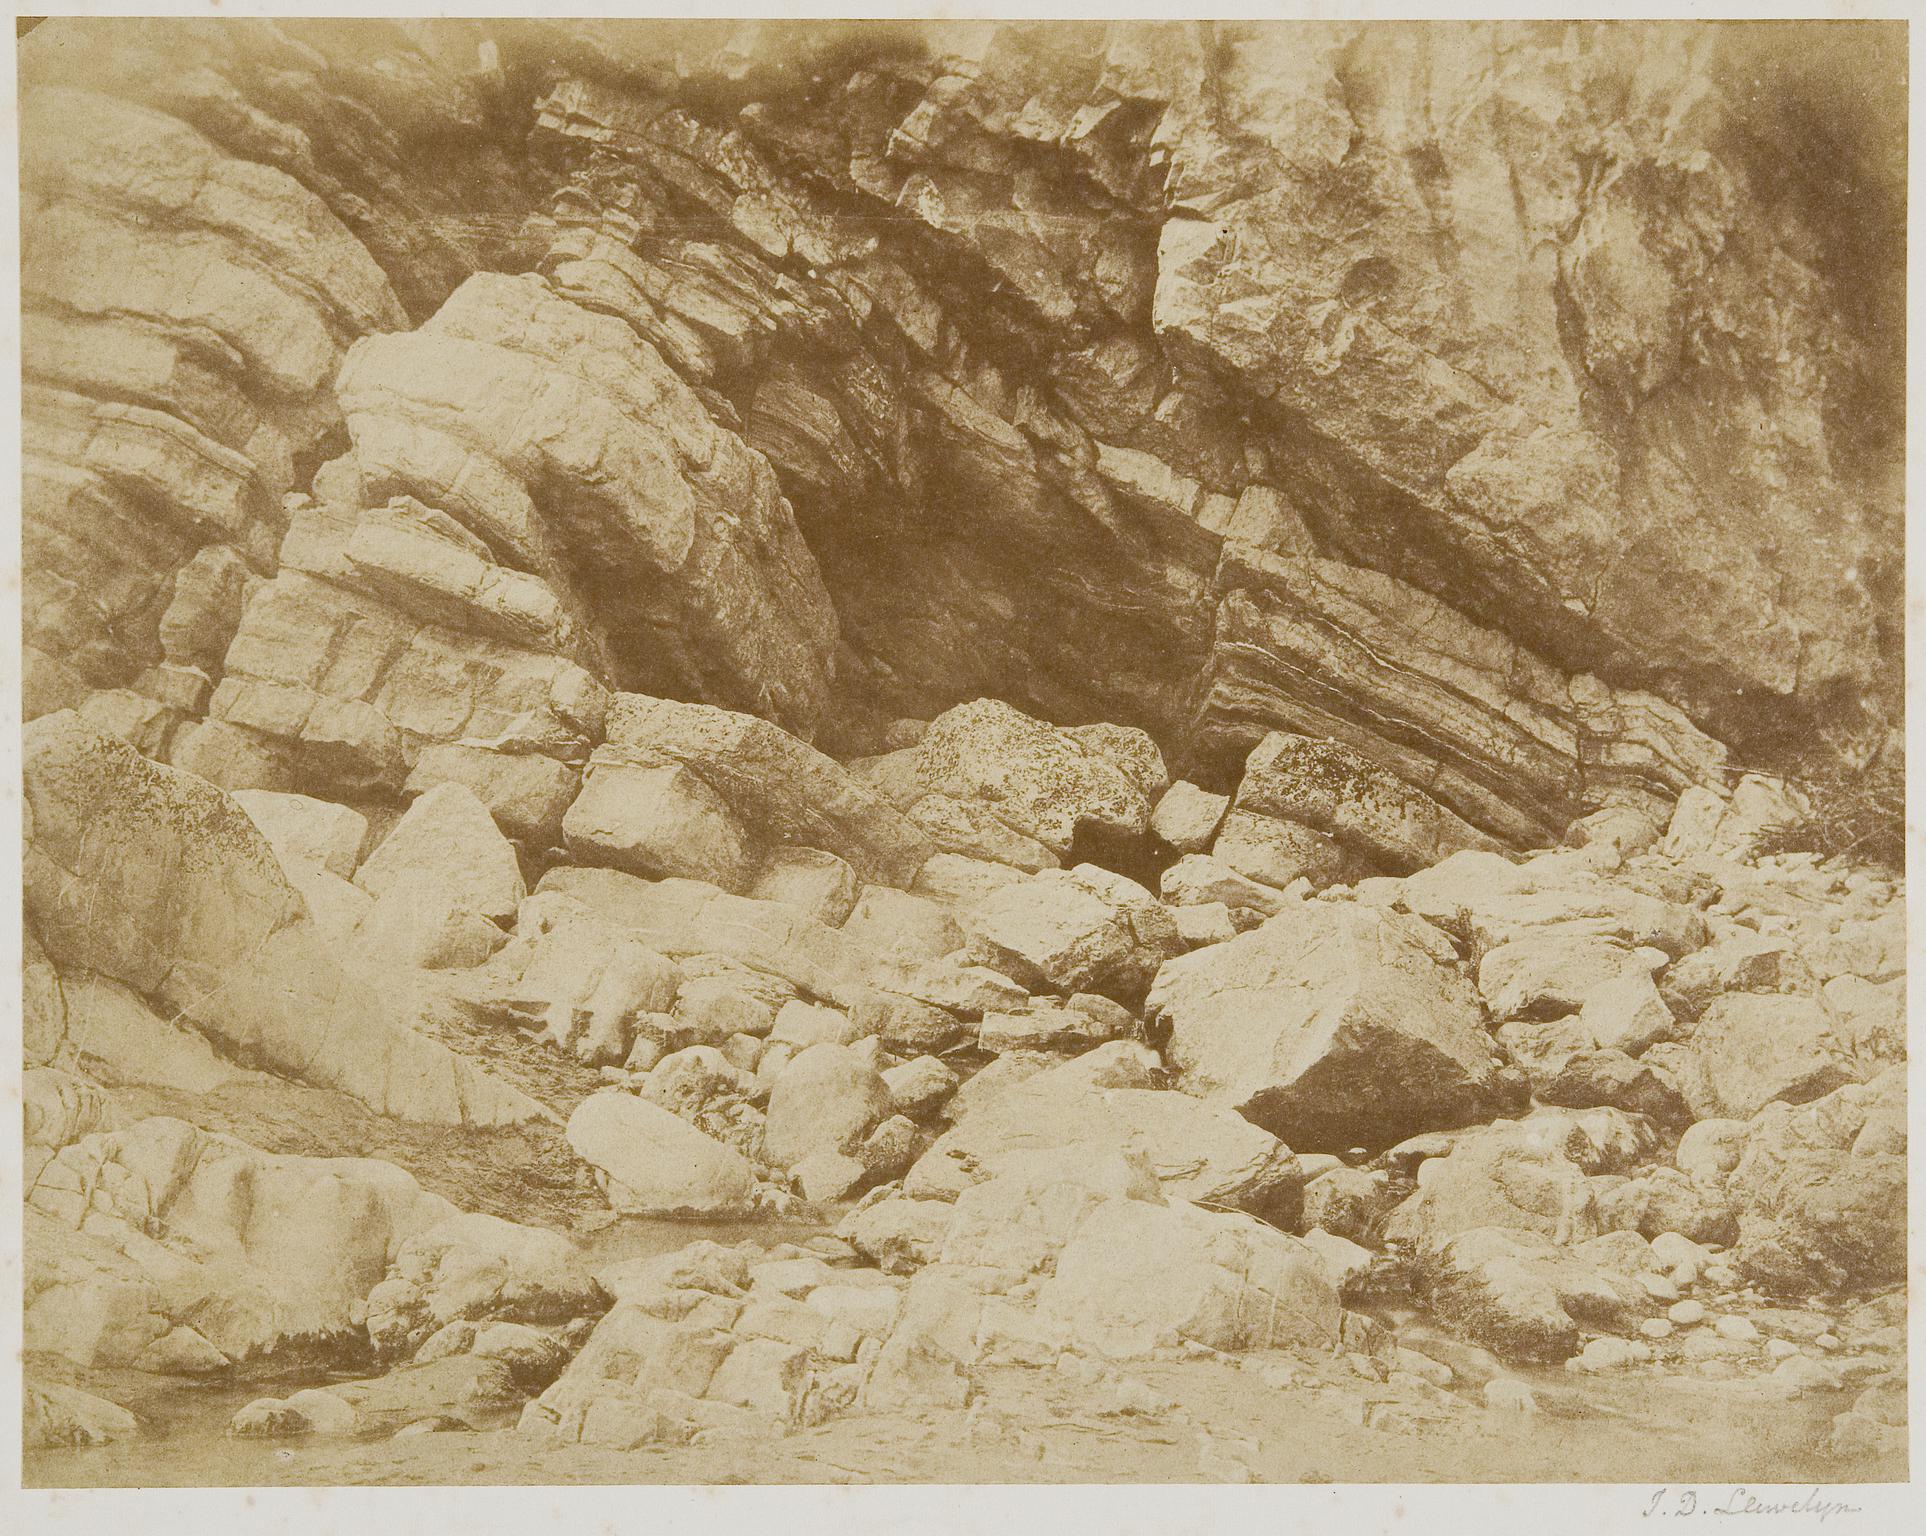 Caswell Bay, photograph